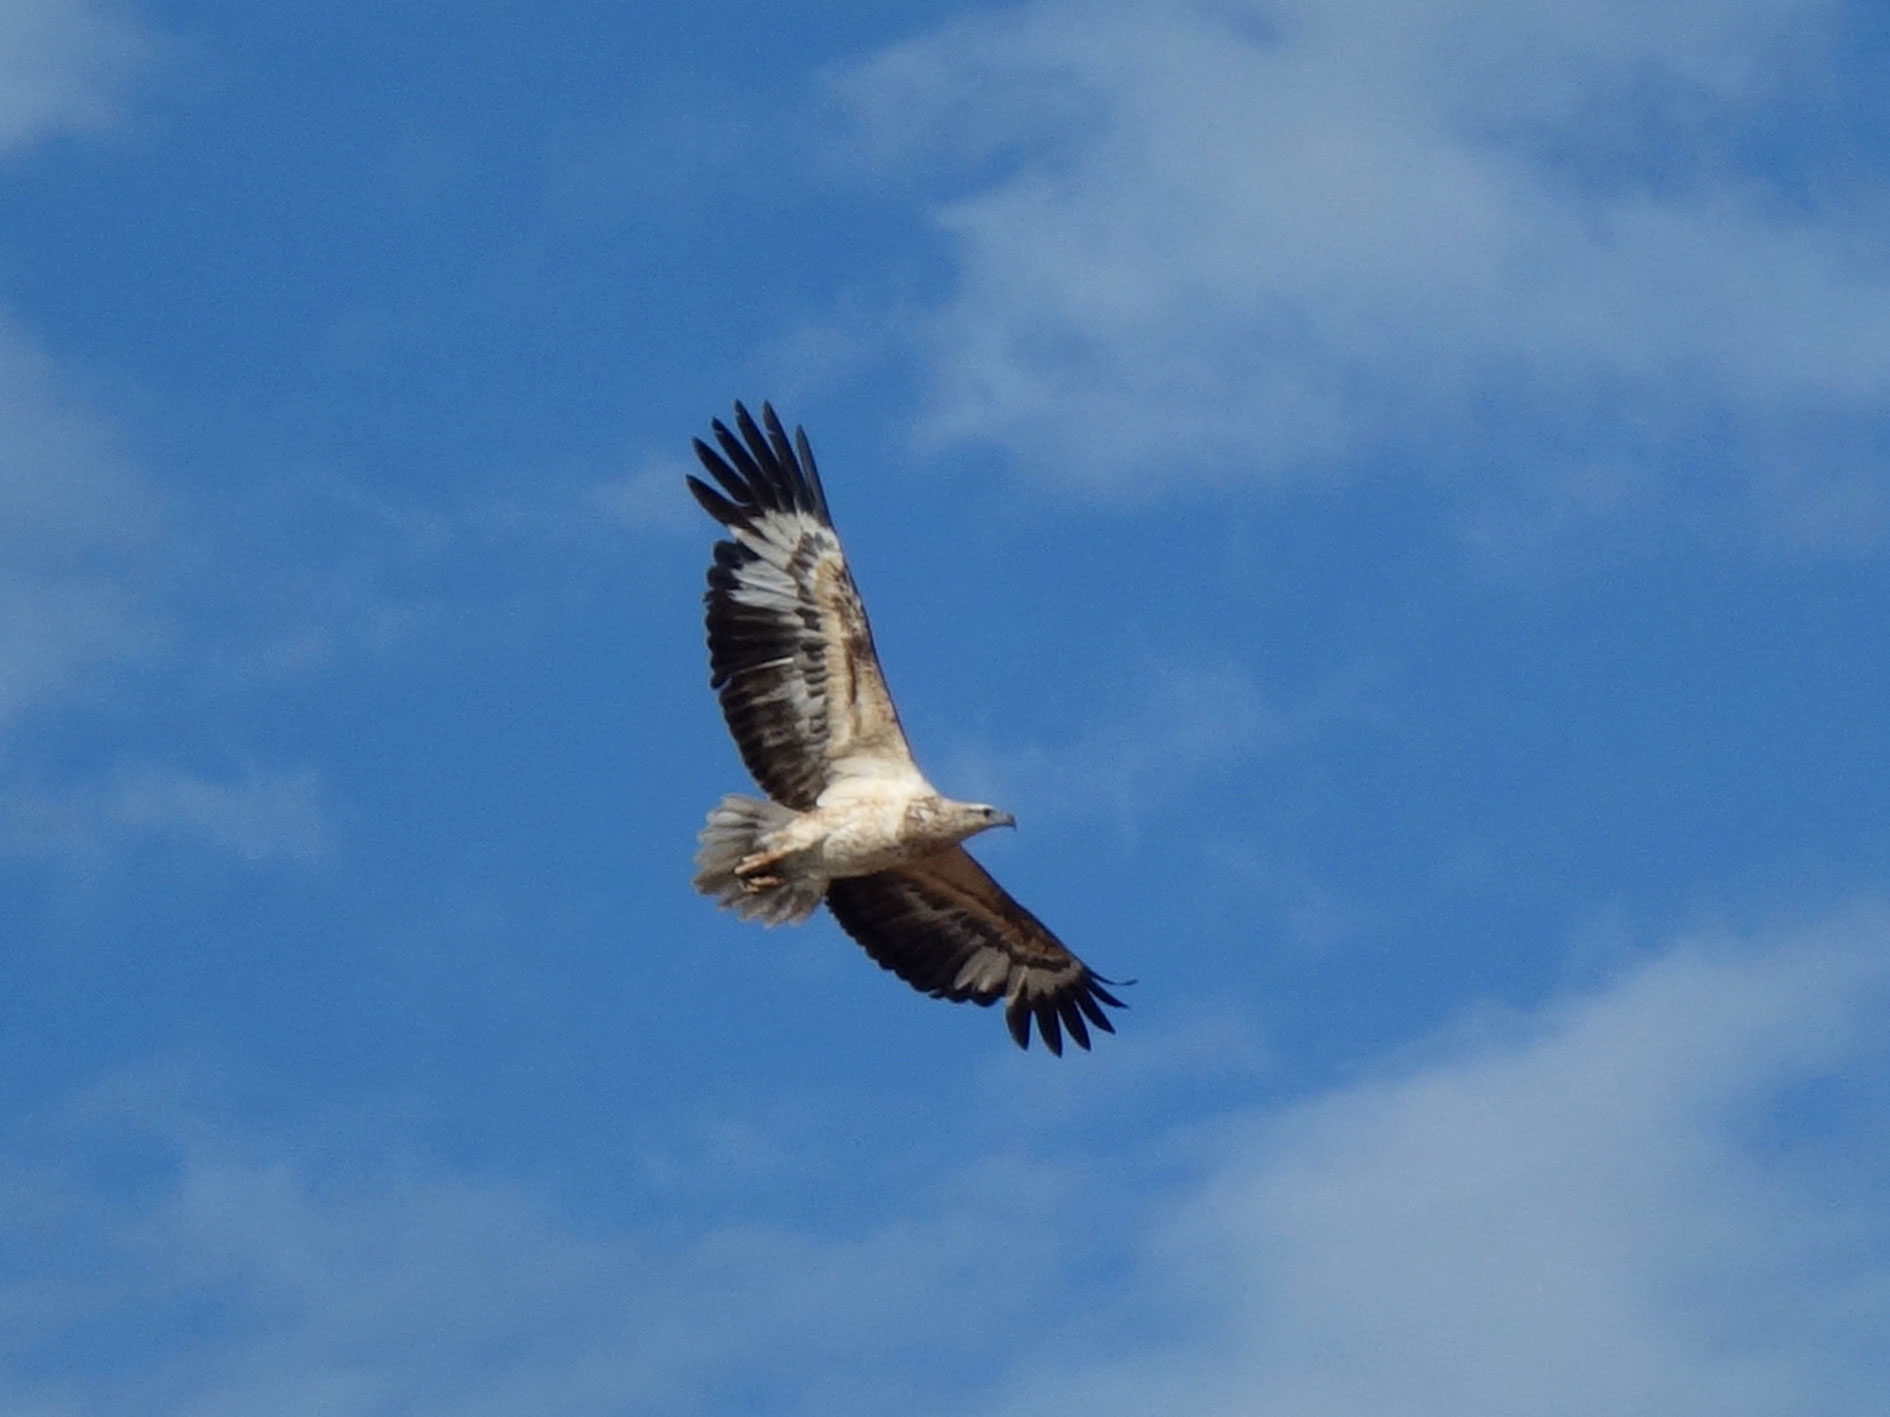 Juvenile white-bellied sea eagle, an example of great wildlife viewing opportunities in Dampier Archipelago